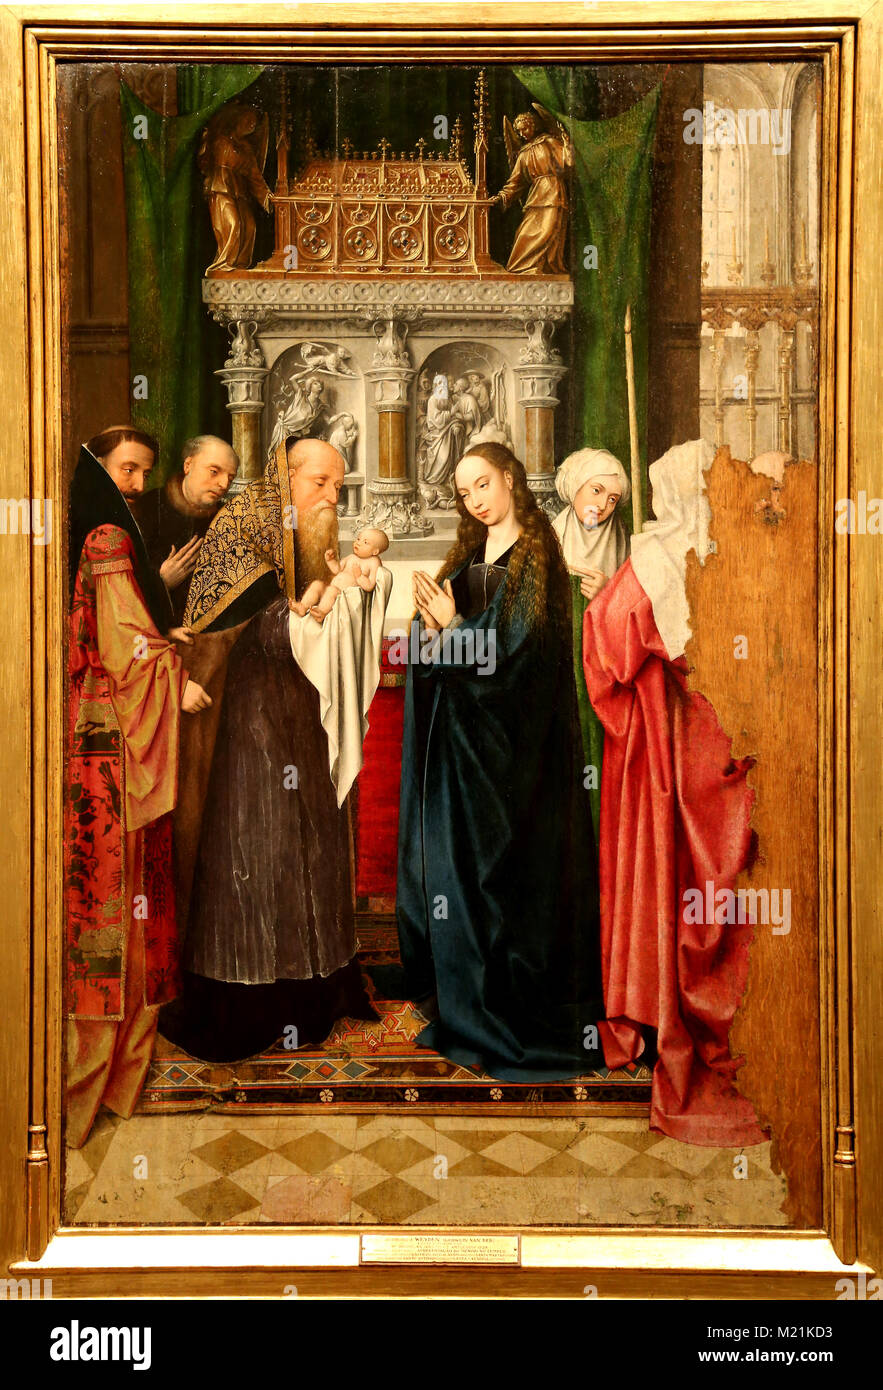 Central panel of the Presentation of the Child in the Temple. Oil on oak wood. Goswijn van der Weyden, C. 1500-1525. Stock Photo